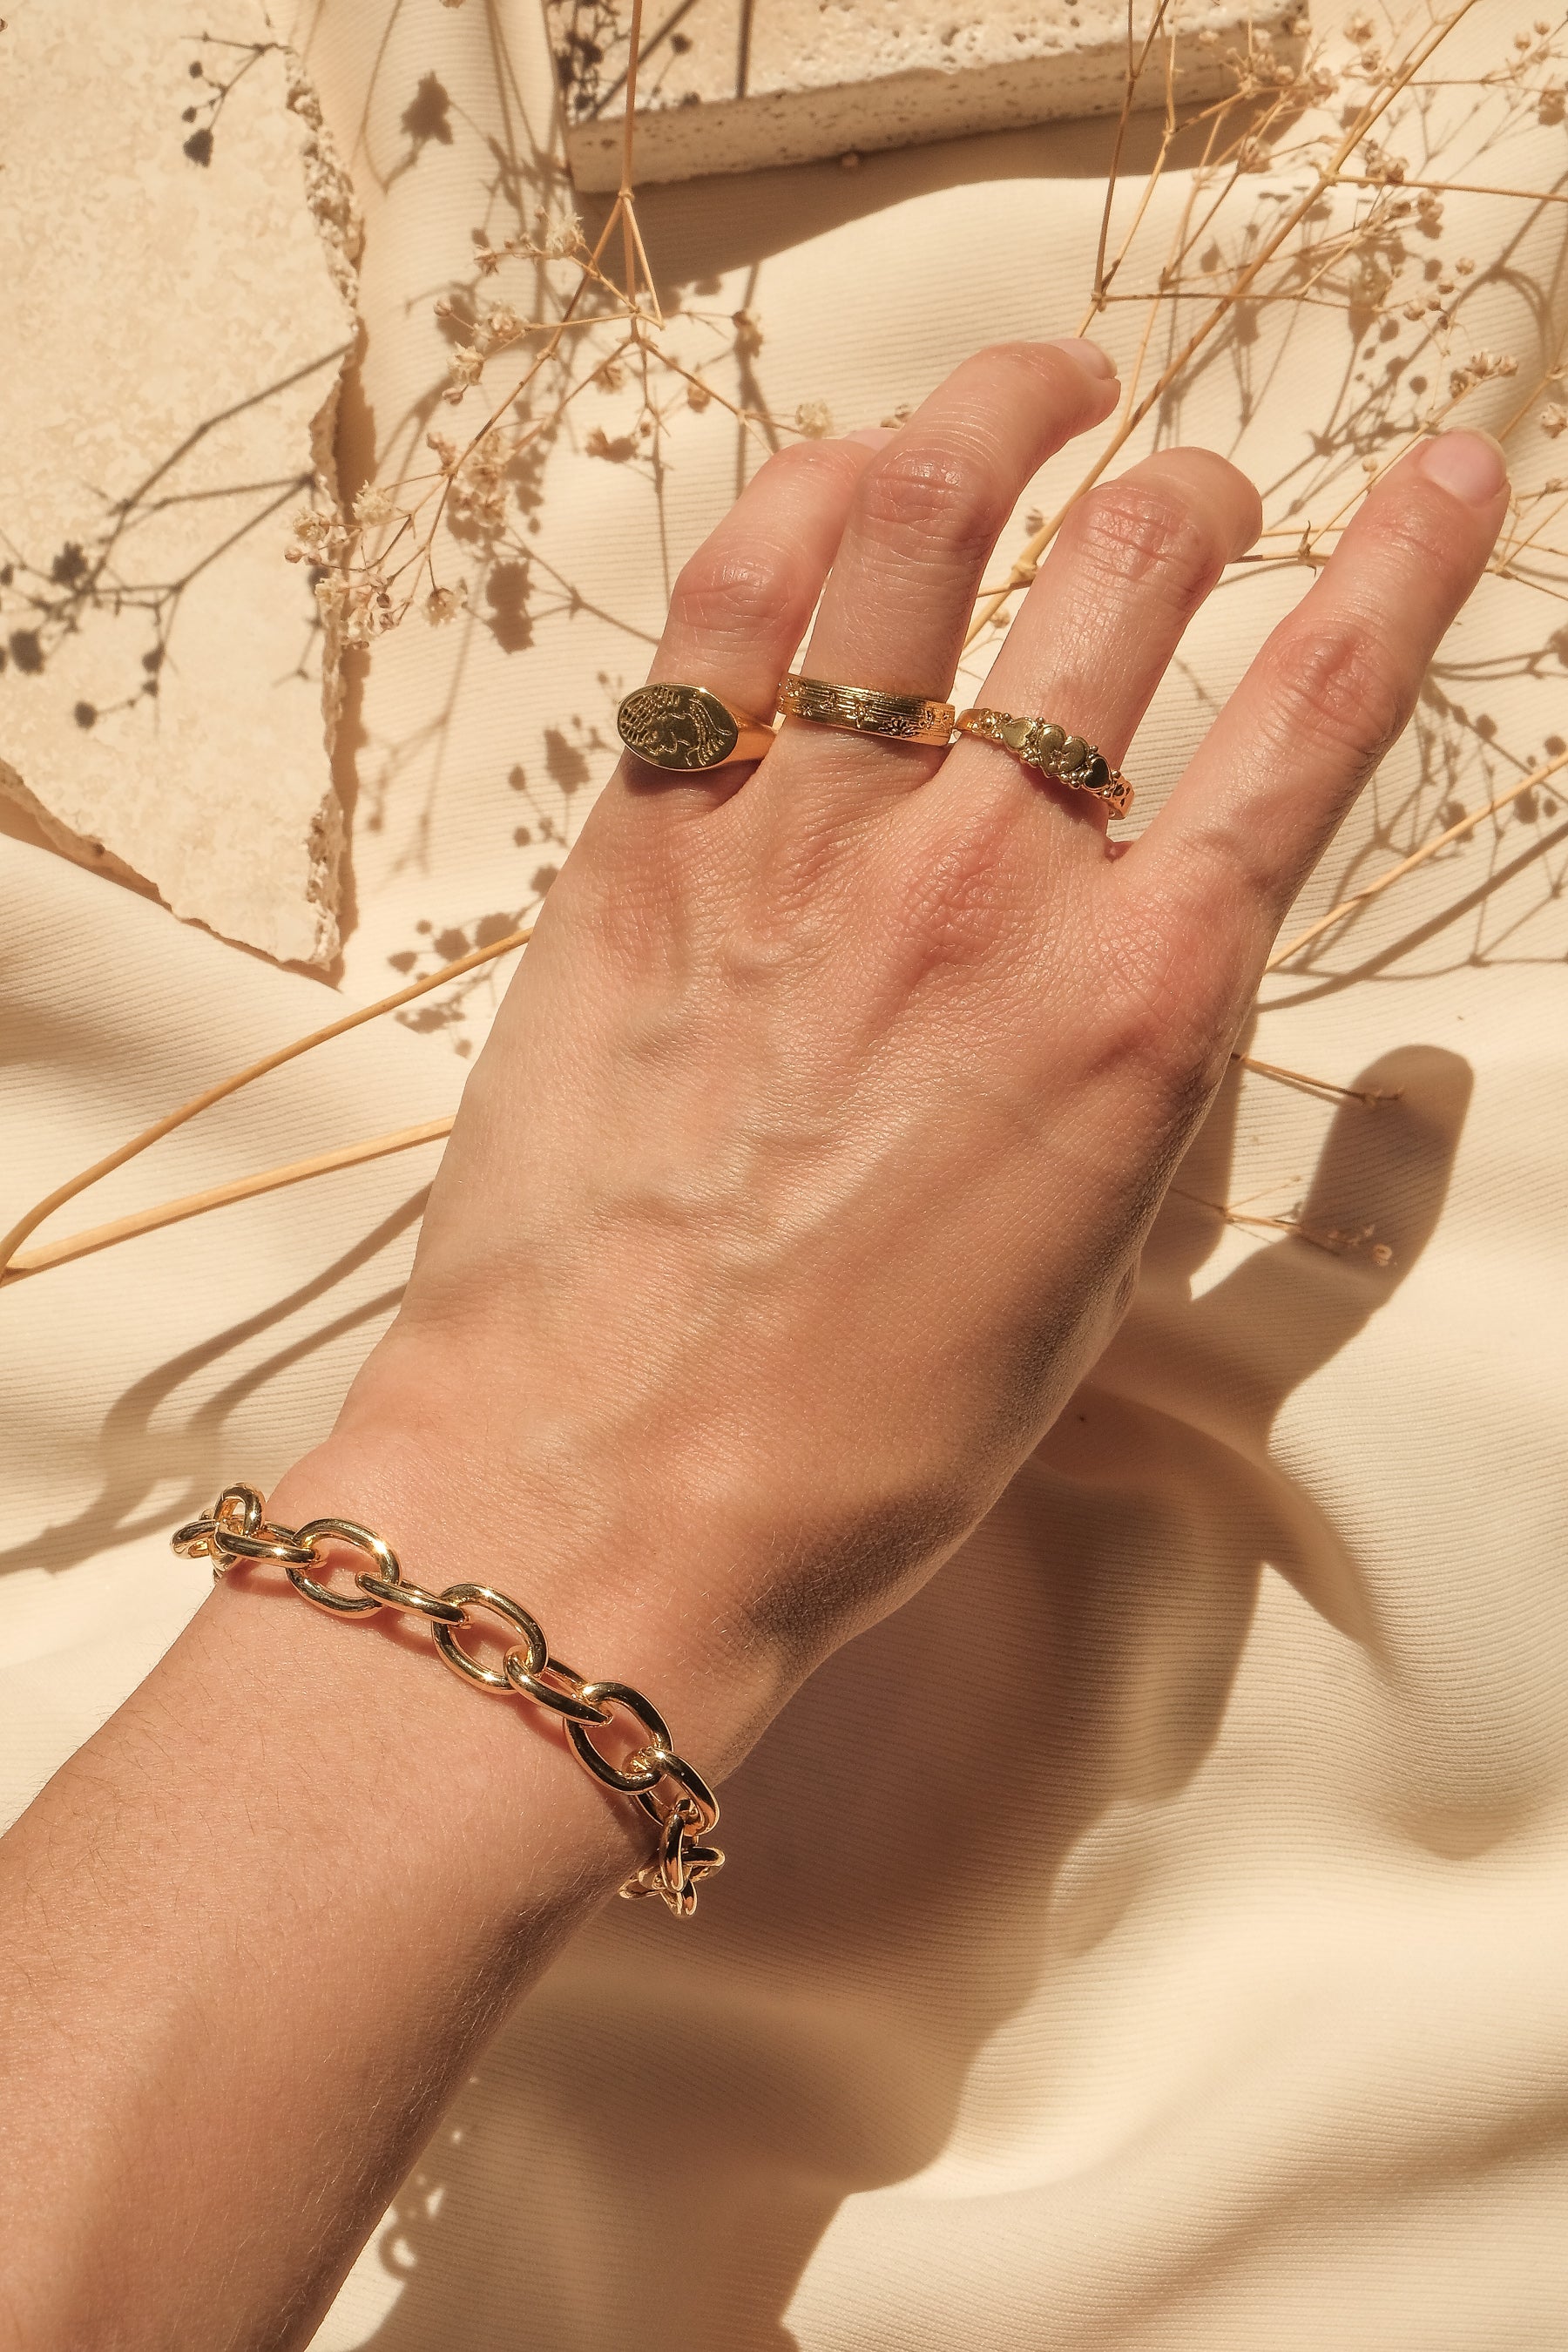 Jew Armbands|gold Plated Chain Link Bracelet For Women - Vintage Flower Chunky  Bangle